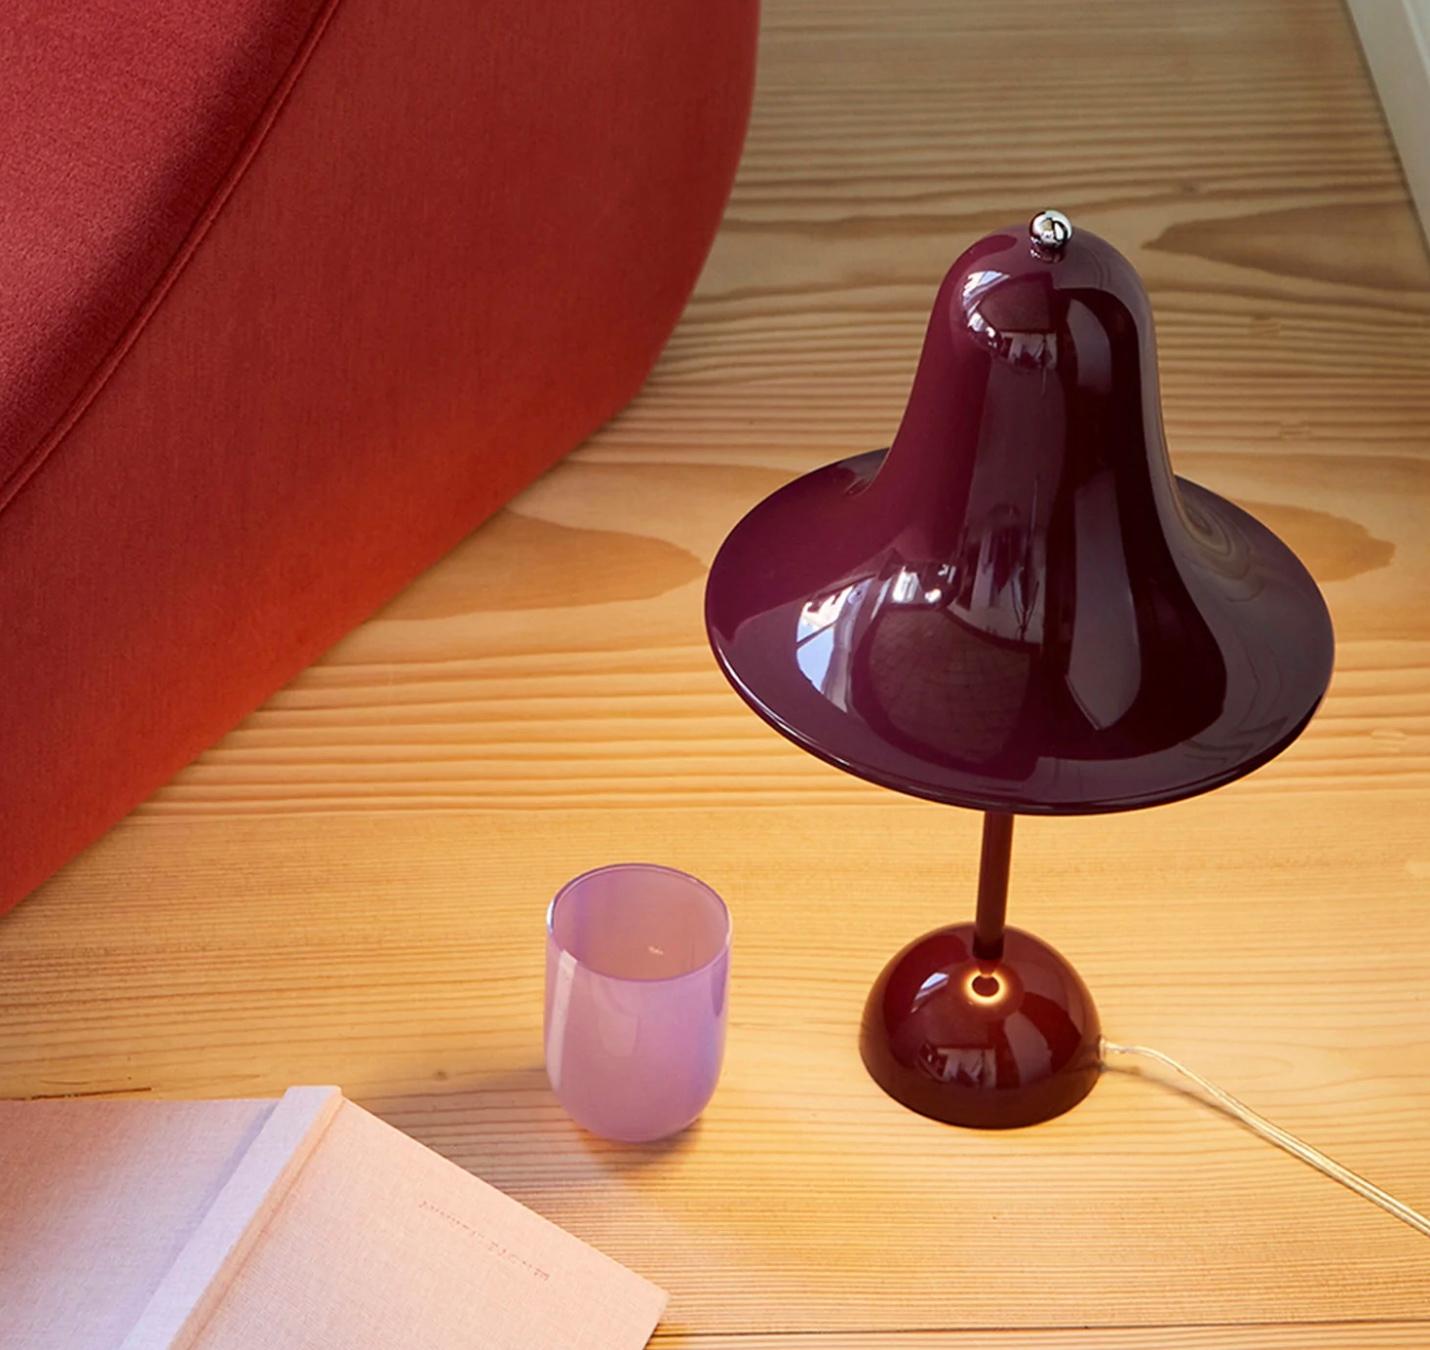 Verner Panton 'Pantop' Table Lamp in 'Grey Sand' 1980 for Verpan In New Condition For Sale In Tilburg, NL